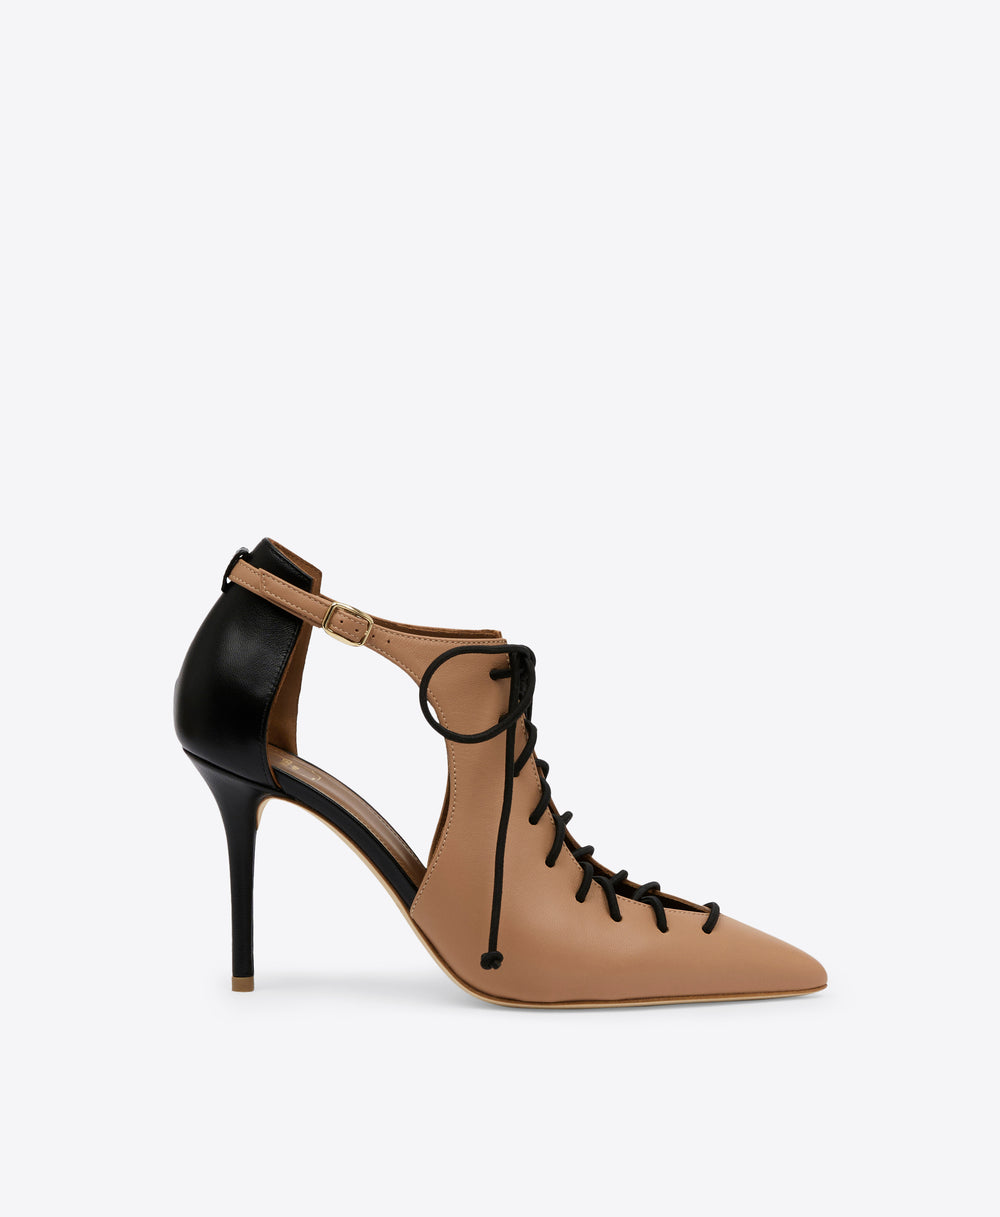 Women's Nude Leather Lace-Up Heels Malone Souliers